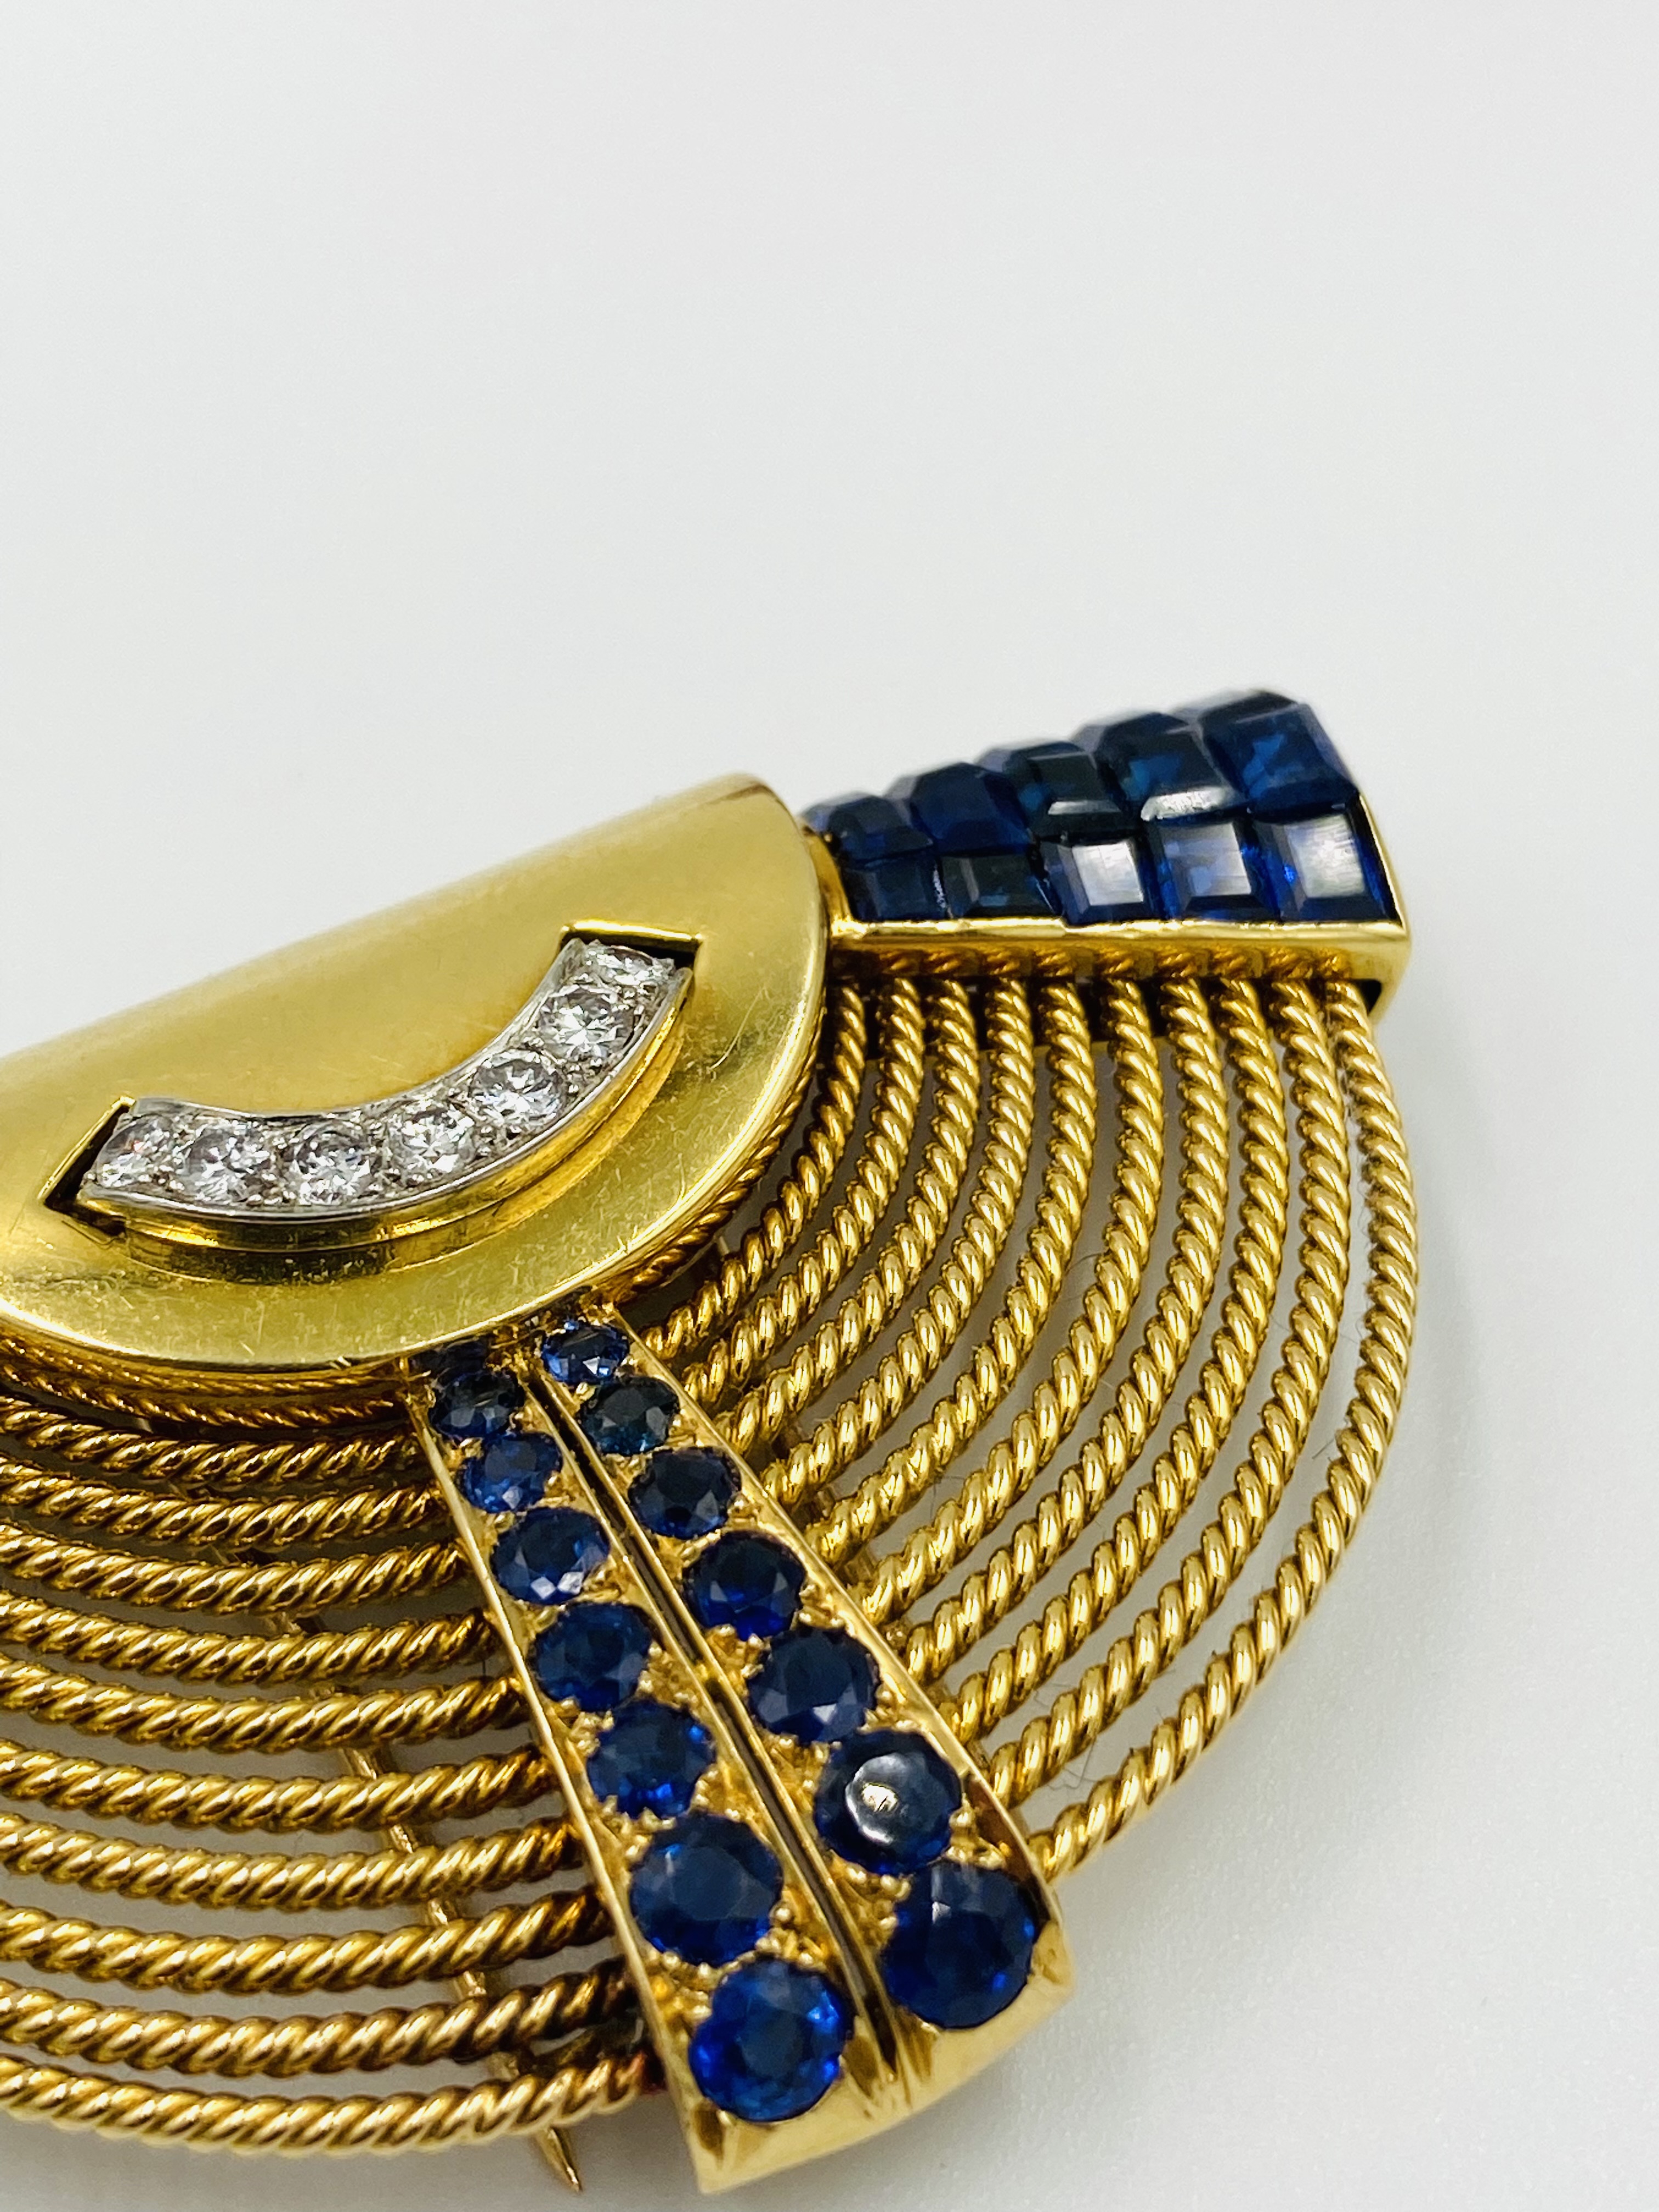 Franch gold clip set with sapphires and diamonds - Image 5 of 9